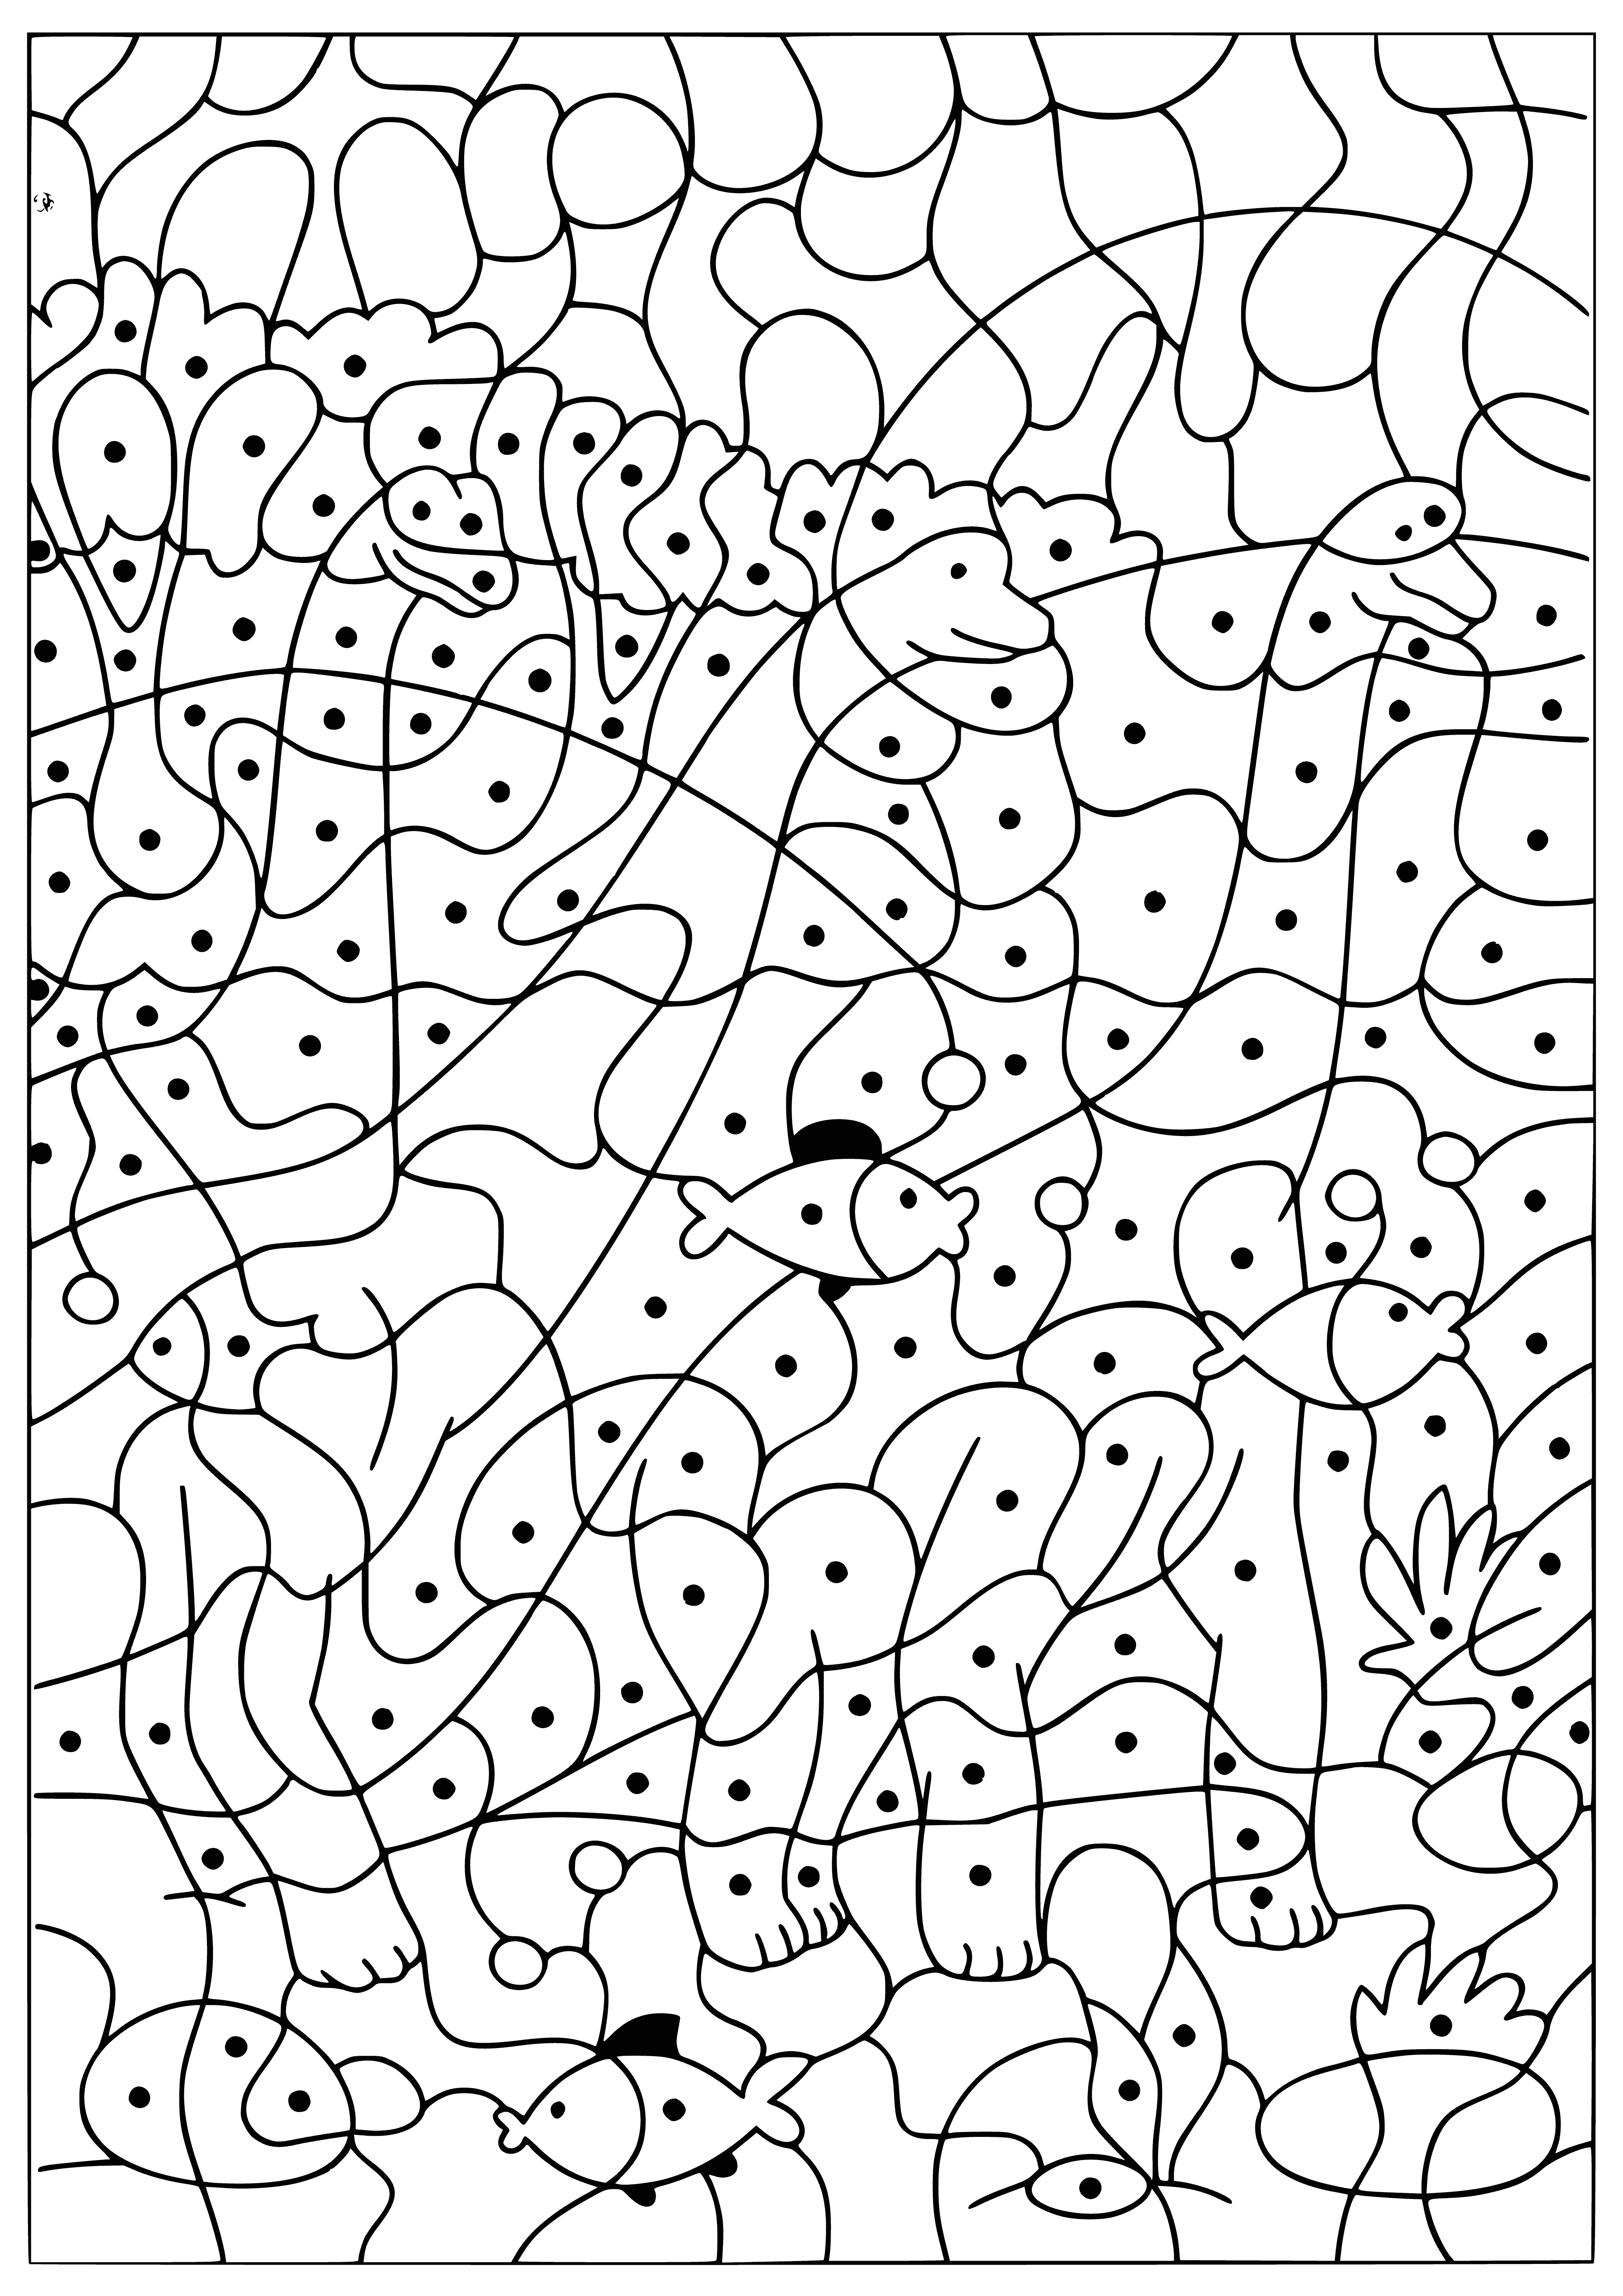 coloring page: --> A large green sauropod surrounded by brightly-colored, smaller dinos eating leaves & playing happily in a prehistoric scene.